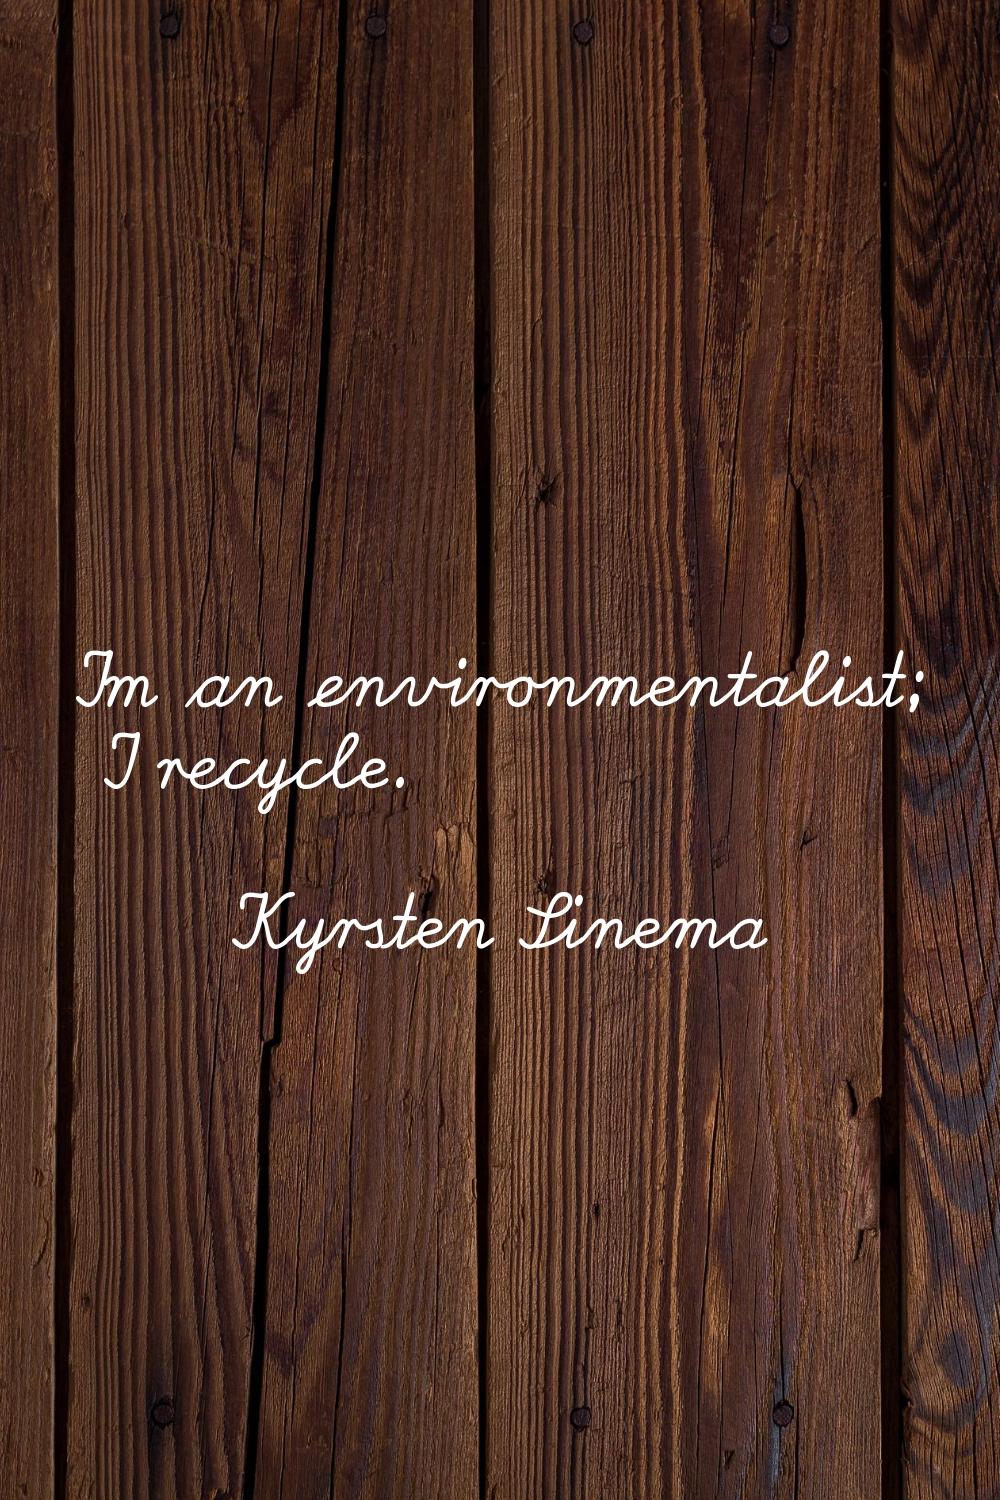 I'm an environmentalist; I recycle.